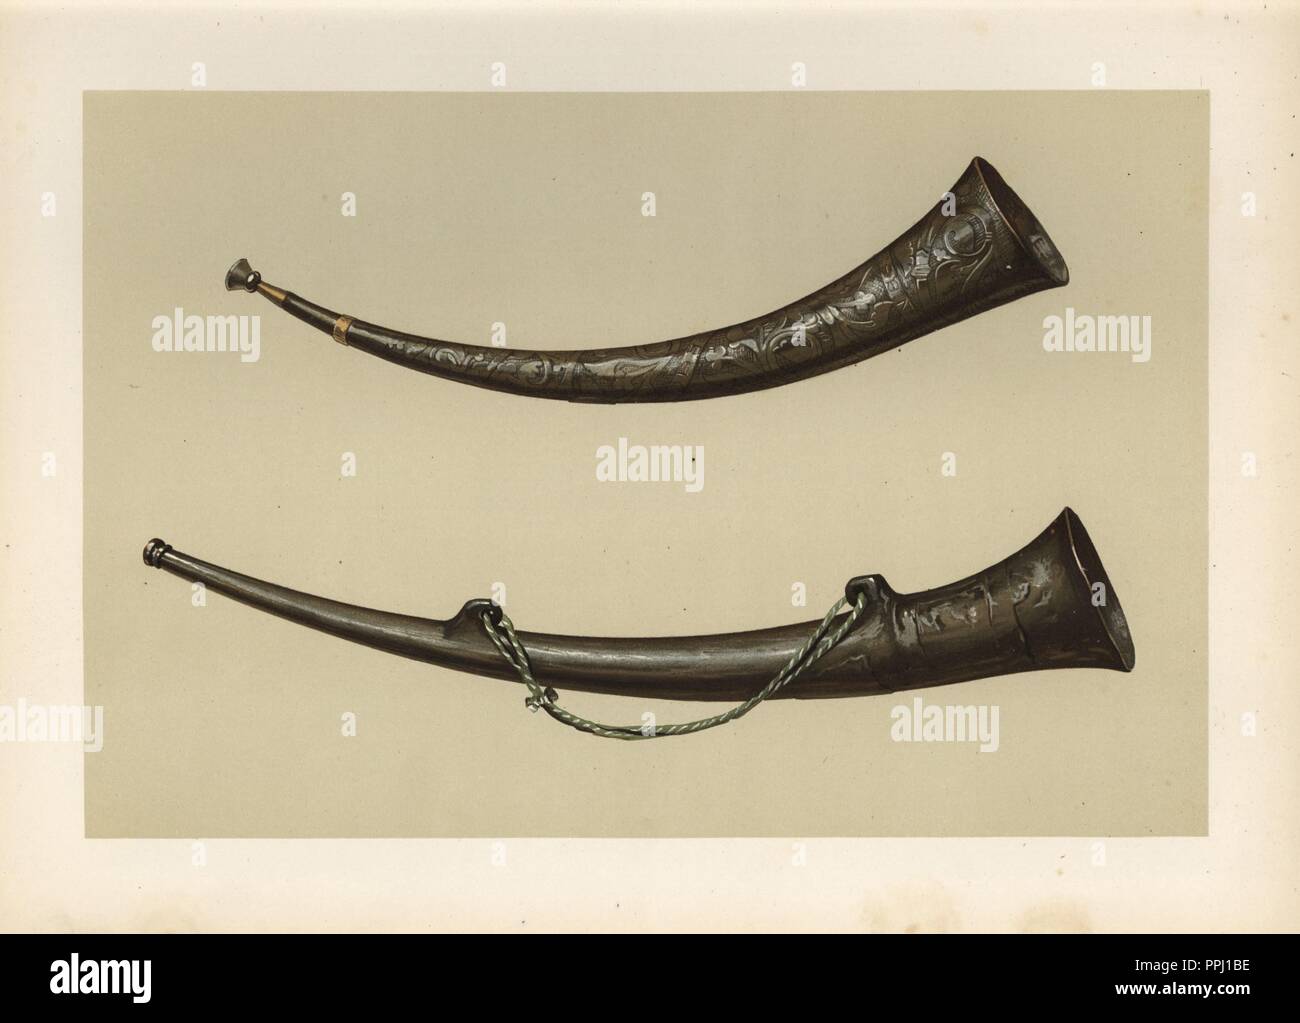 Burgmote horns of hammered bronze from the Corporations of Canterbury and Dover. The horns were used from the 14th to 19th centuries for municipal ceremonies. Chromolithograph from an illustration by William Gibb from A.J. Hipkins' 'Musical Instruments, Historic, Rare and Unique,' Adam and Charles Black, Edinburgh, 1888. Alfred James Hipkins (1826-1903) was an English musicologist who specialized in the history of the pianoforte and other instruments. William Gibb was a master illustrator and chromolithographer and illustrated 'The Royal House of Stuart' (1890), 'Naval and Military Trophies' ( Stock Photo